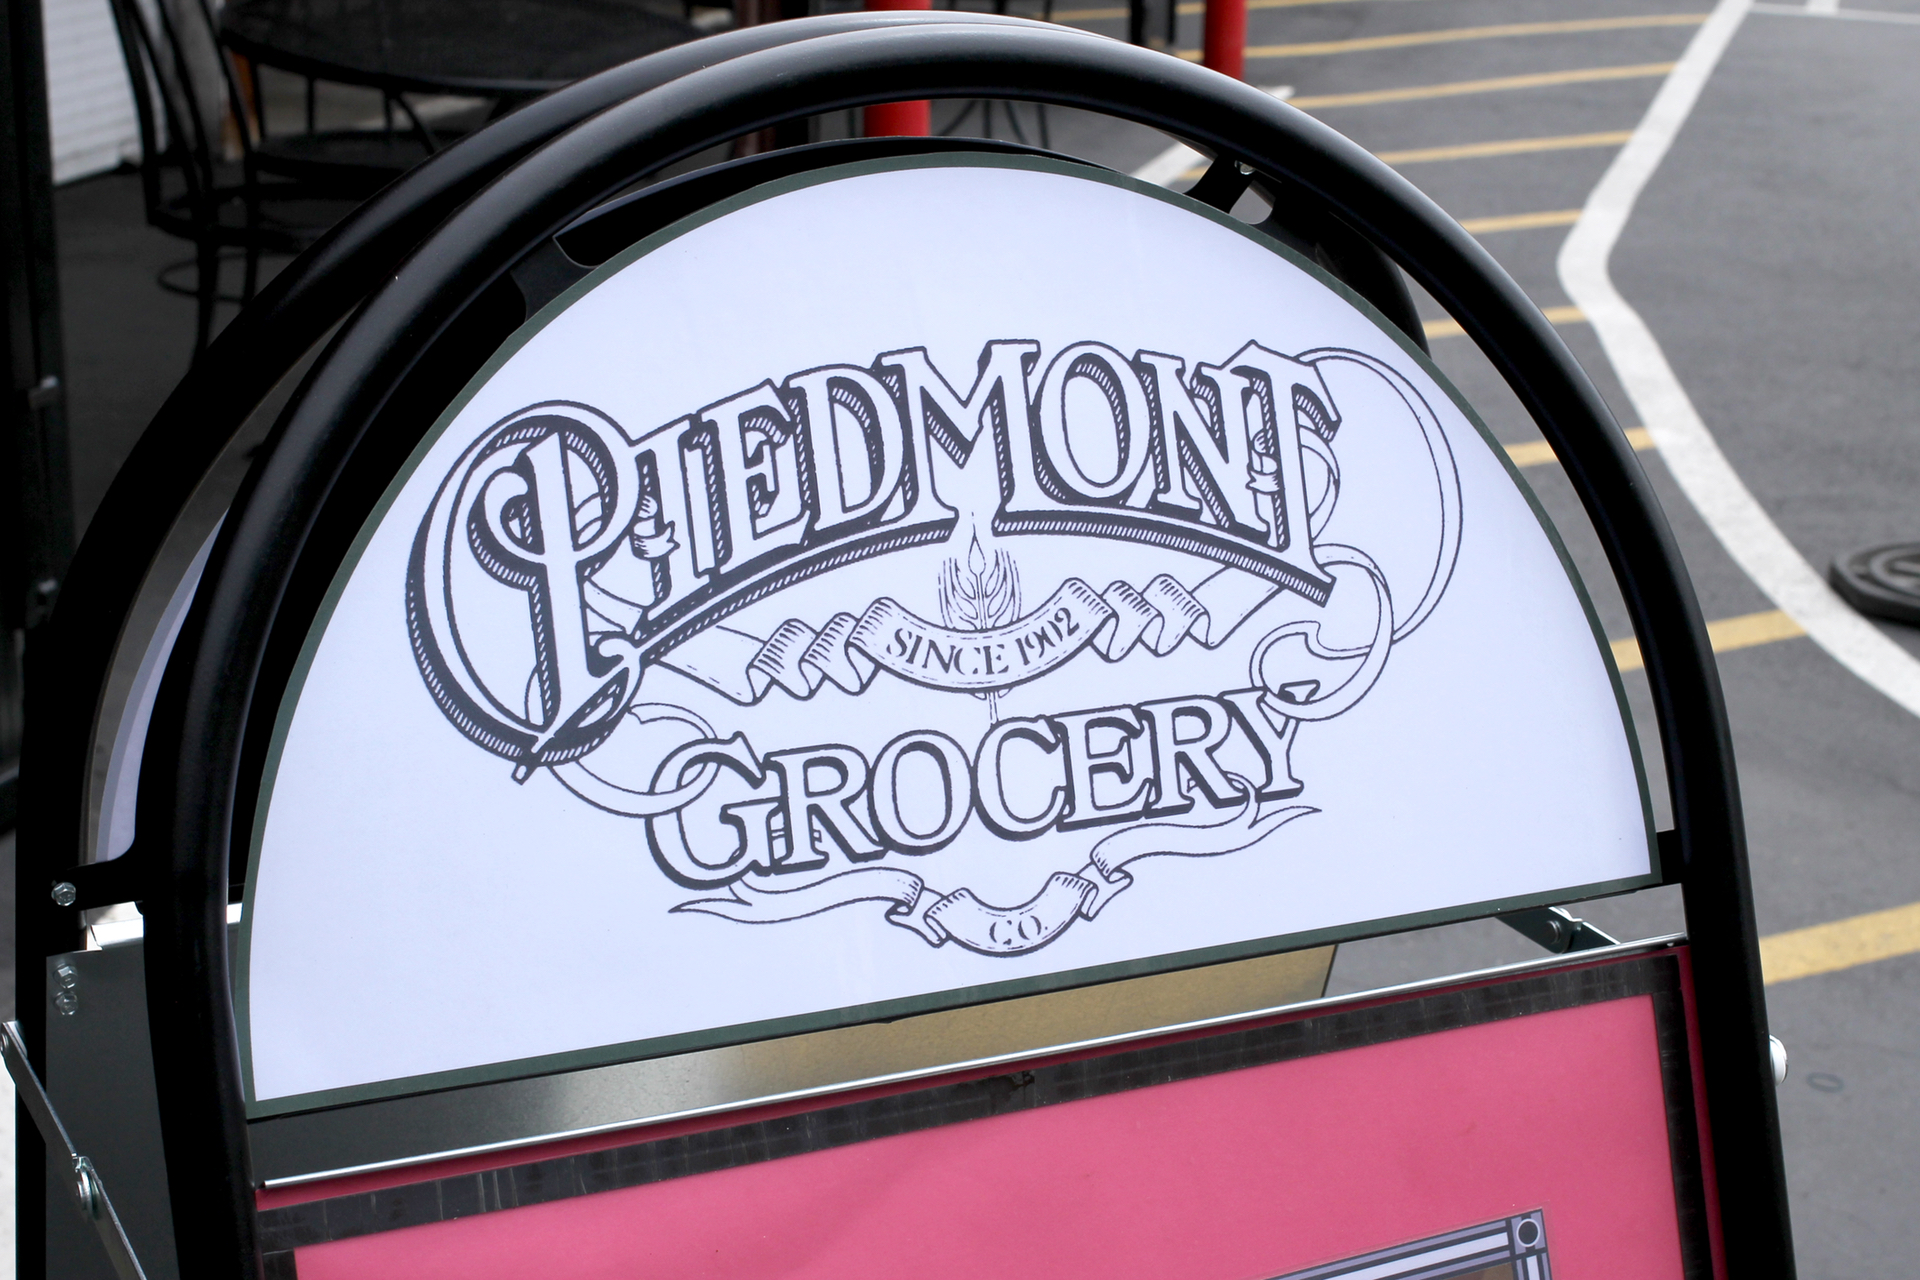 Piedmont Grocery has been on the Avenue for over 100 years.